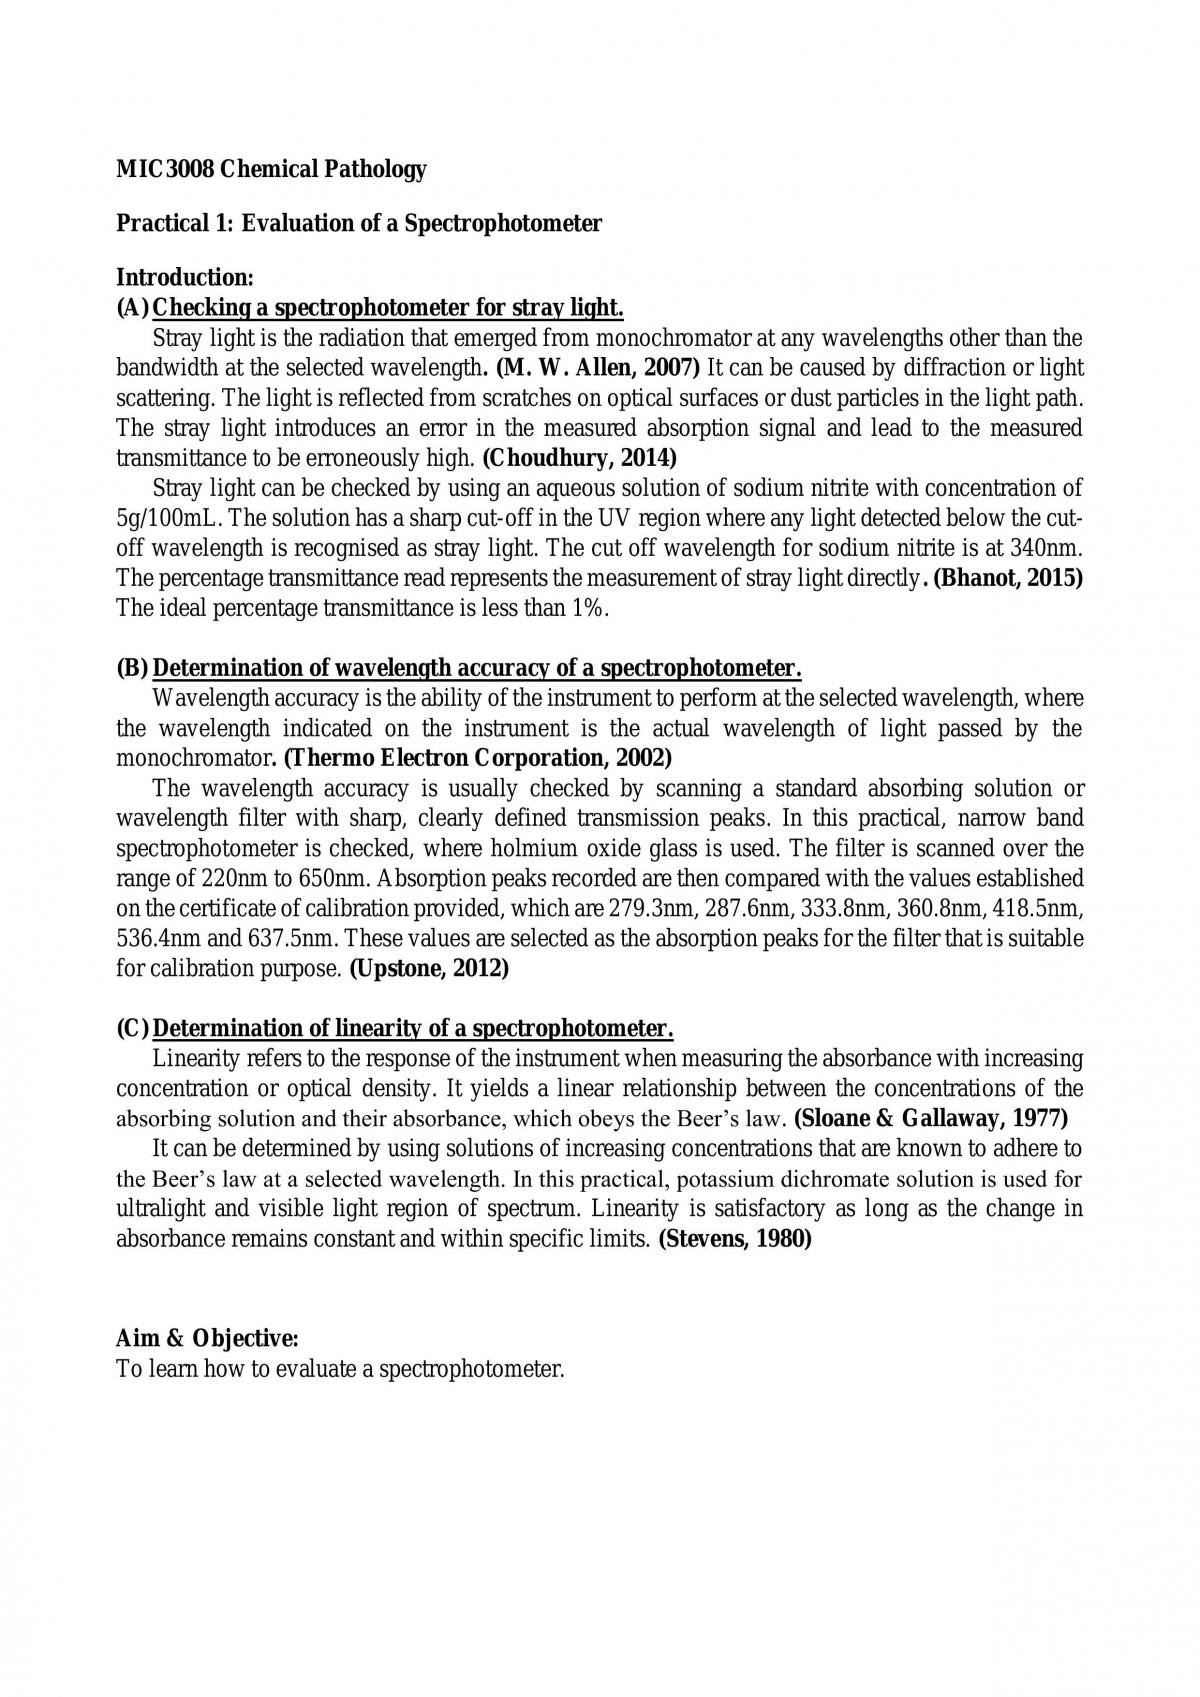 Practical 1: Evaluation of a Spectrophotometer - Page 1